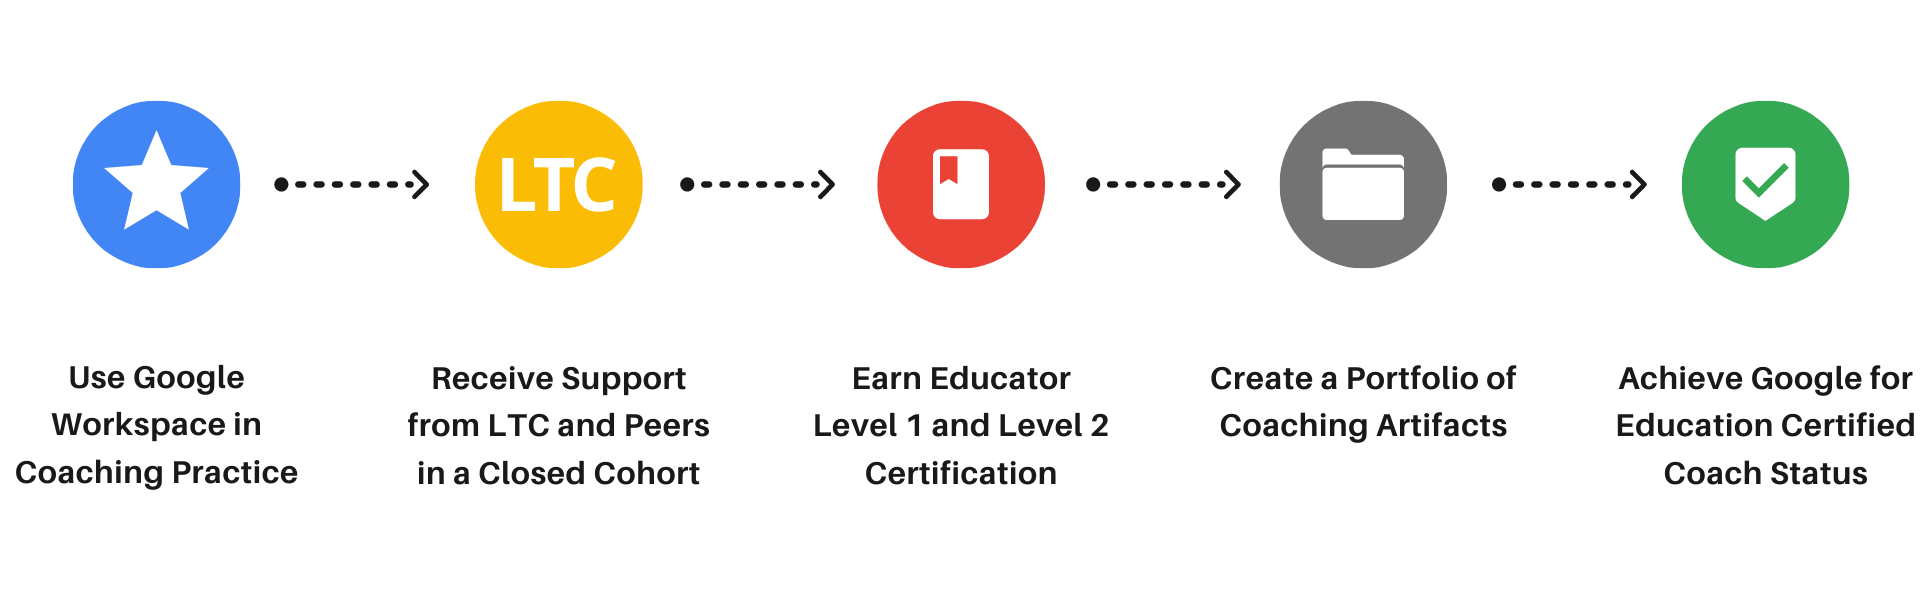 Google for Education Certified Coach Path